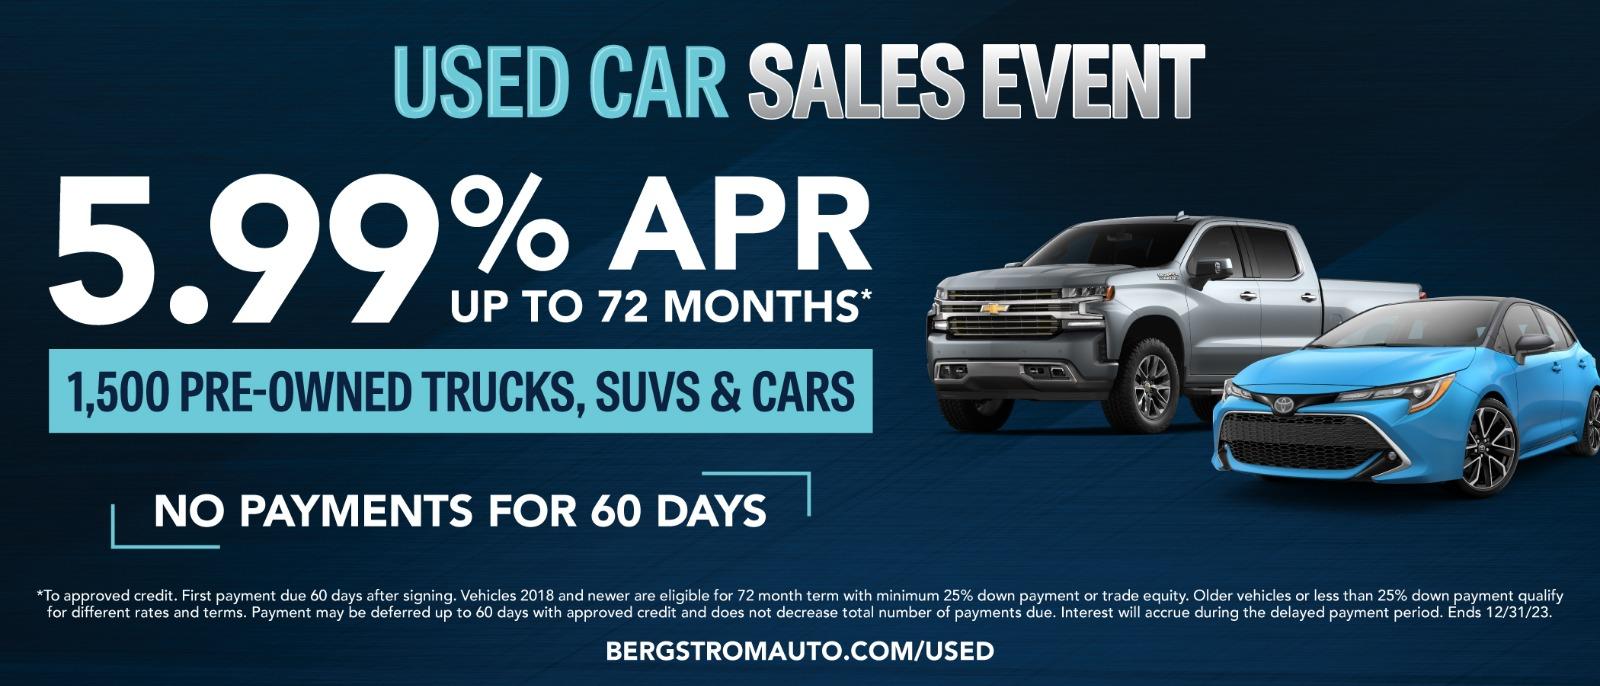 Used Car Sales Event 5.99% APR up to 72 Month